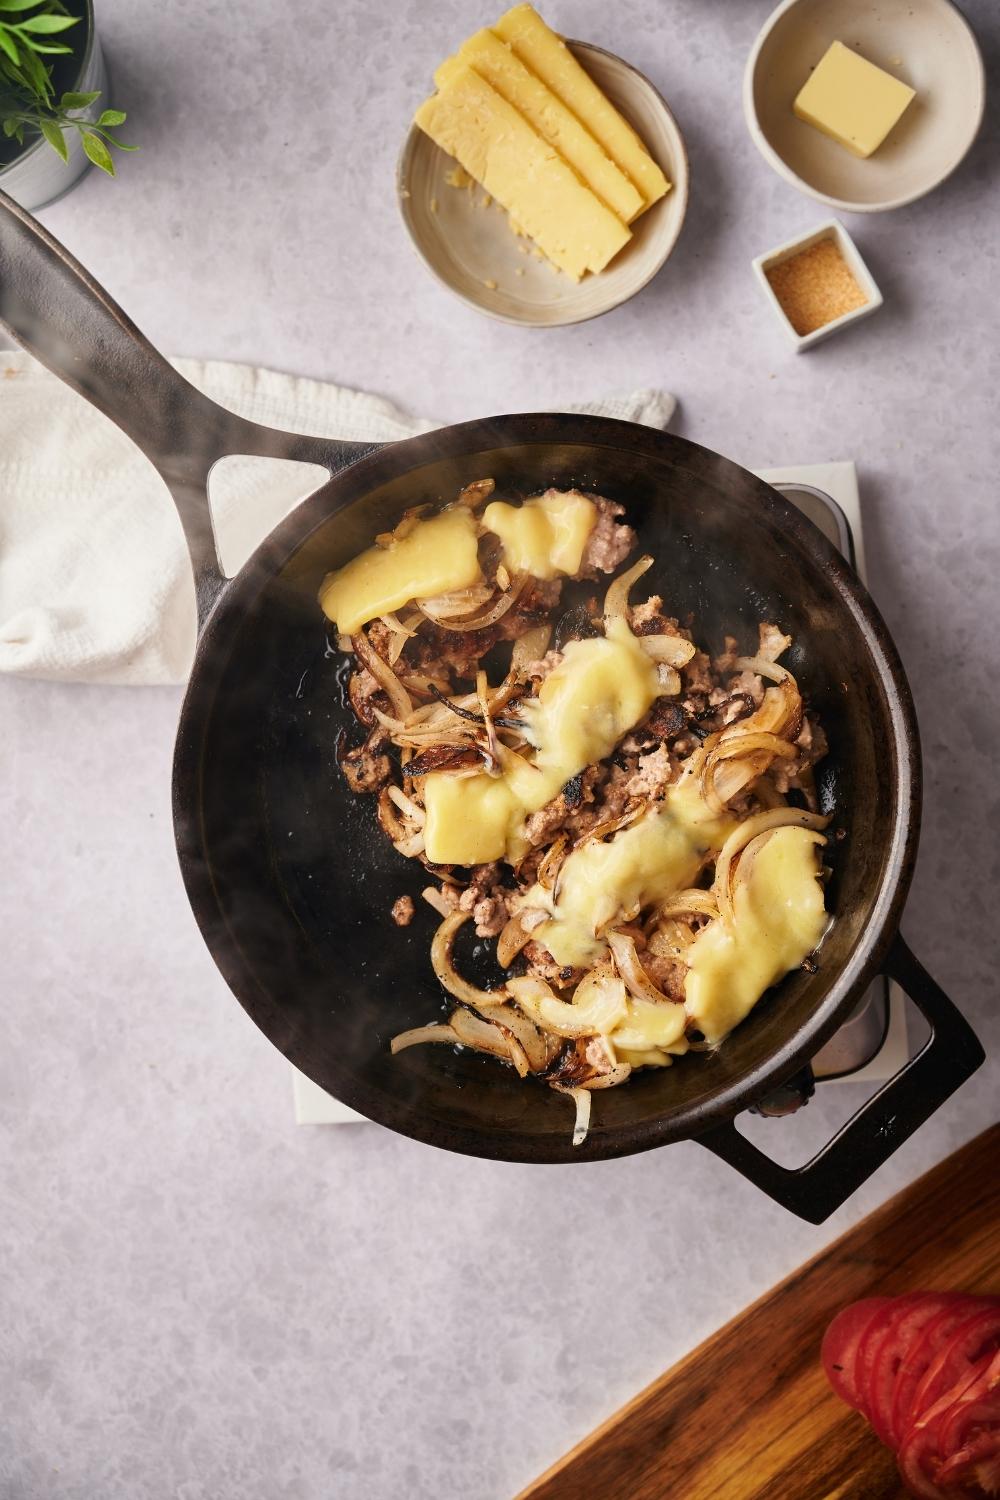 Melted cheese on top of ground beef and caramelized onions in a skillet.